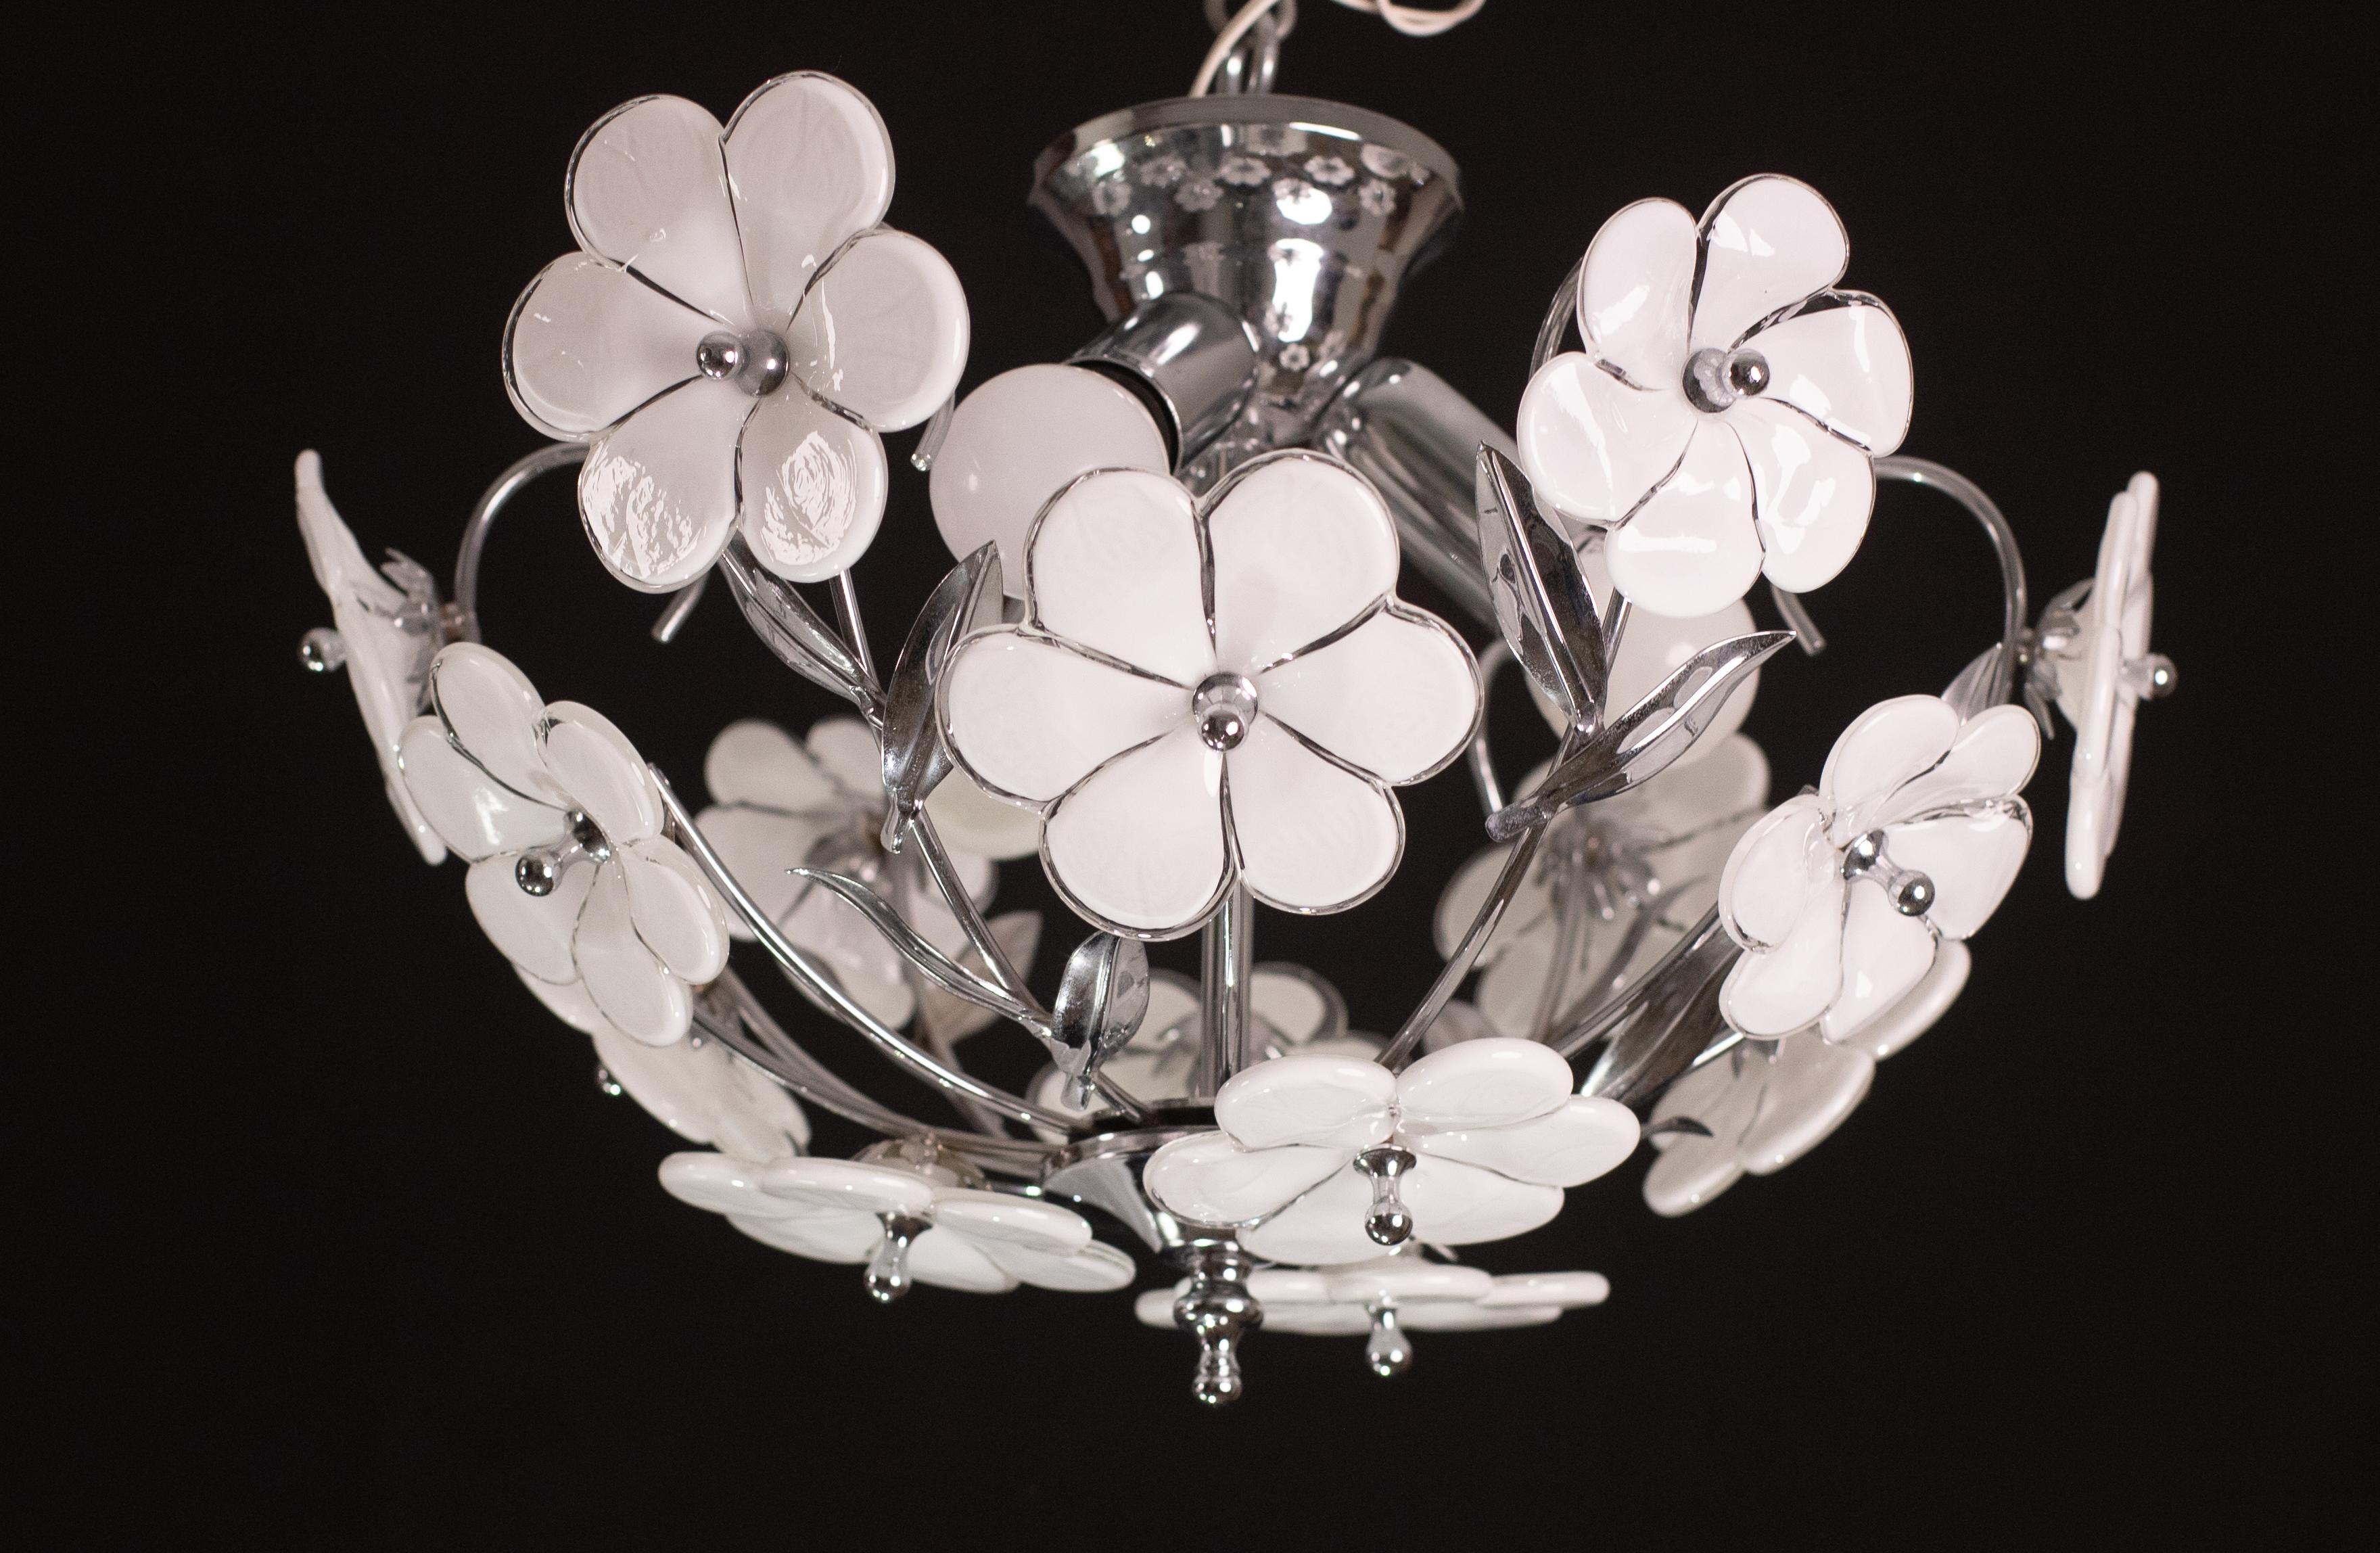 Vintage Murano glass chandelier full of white flowers.
The chandelier has 3 light points with E14 connection, possible to rewire for USa.
The frame has been rechromed in silver, so it is new.
The height of the chandelier is 25 cm, the diameter is 42.